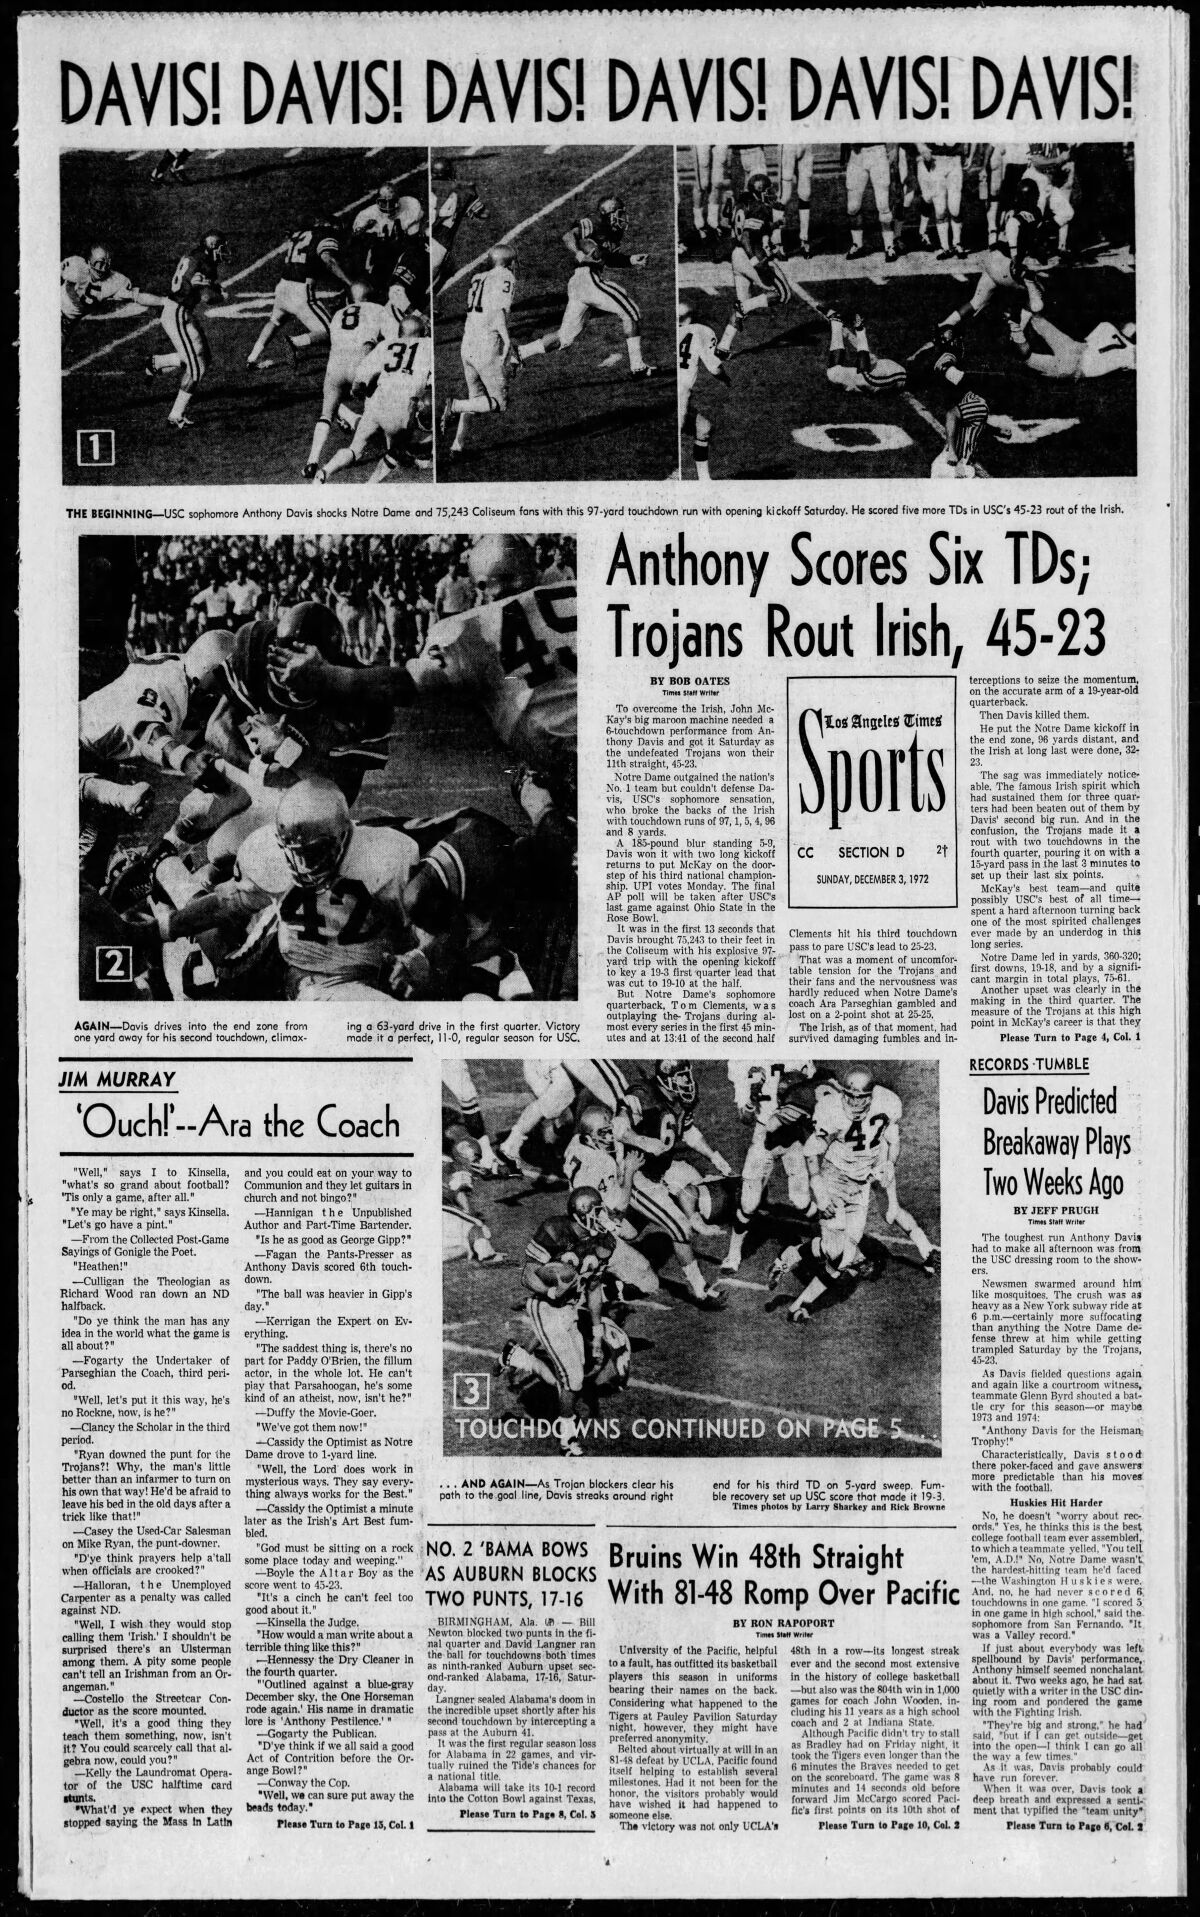 The front page of the Los Angeles Times sports section from Dec. 3, 1972, highlighting USC running back Anthony Davis